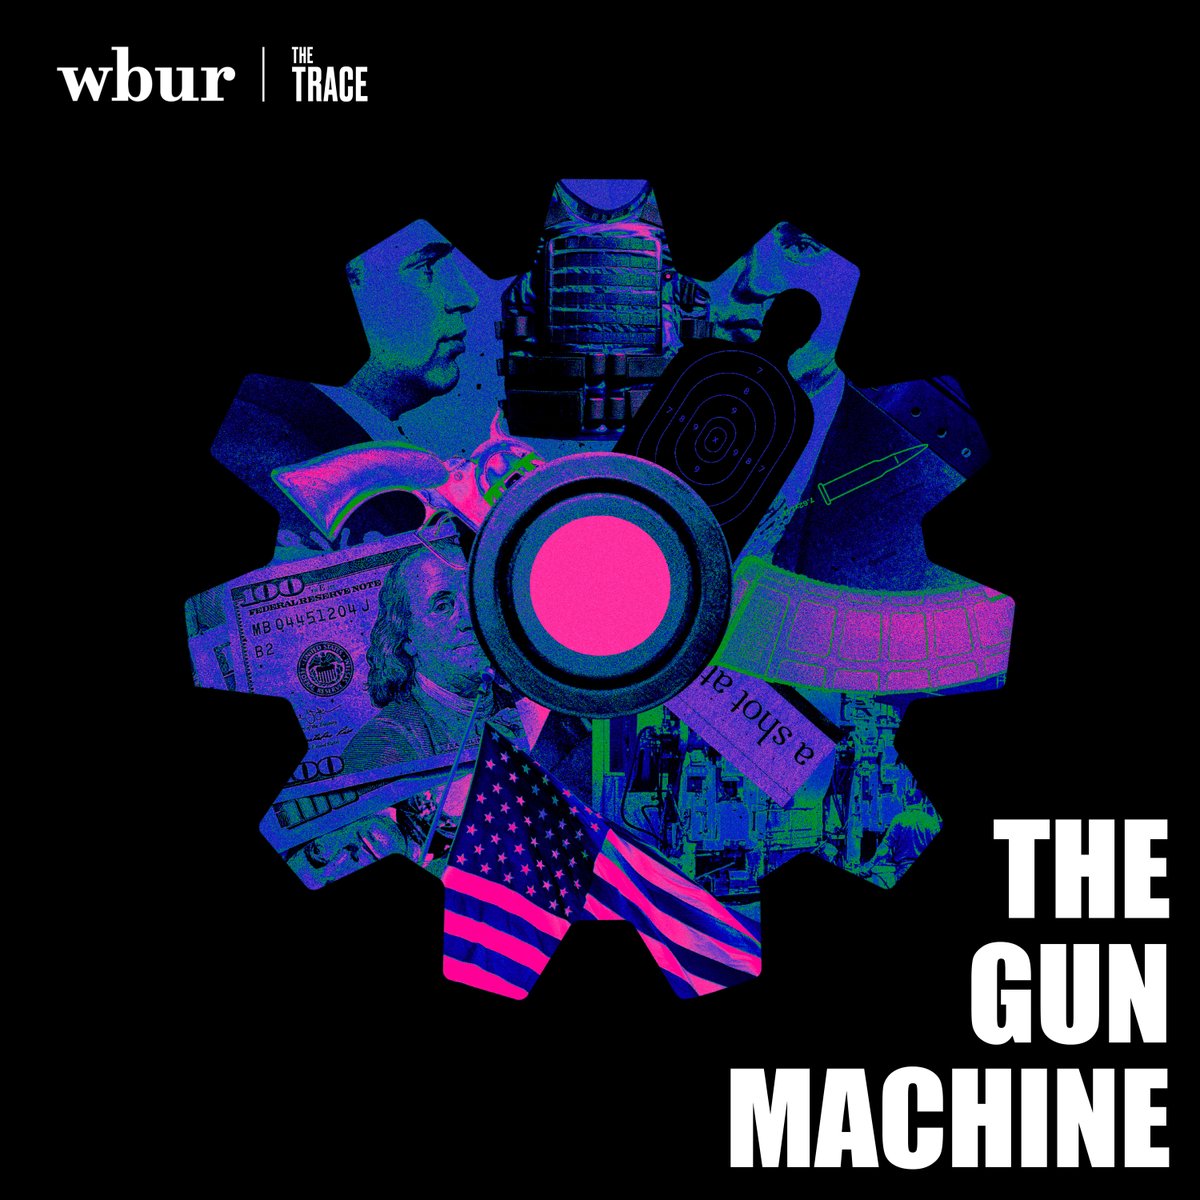 This week @LatinoUSA is sharing an episode of 'The Gun Machine,' a new podcast from @WBUR, in partnership with @teamtrace. This podcast explores the 250-year history of one of the most tragic and confounding forms of addiction in America: guns. LISTEN ➡️ bit.ly/3RBXfpK